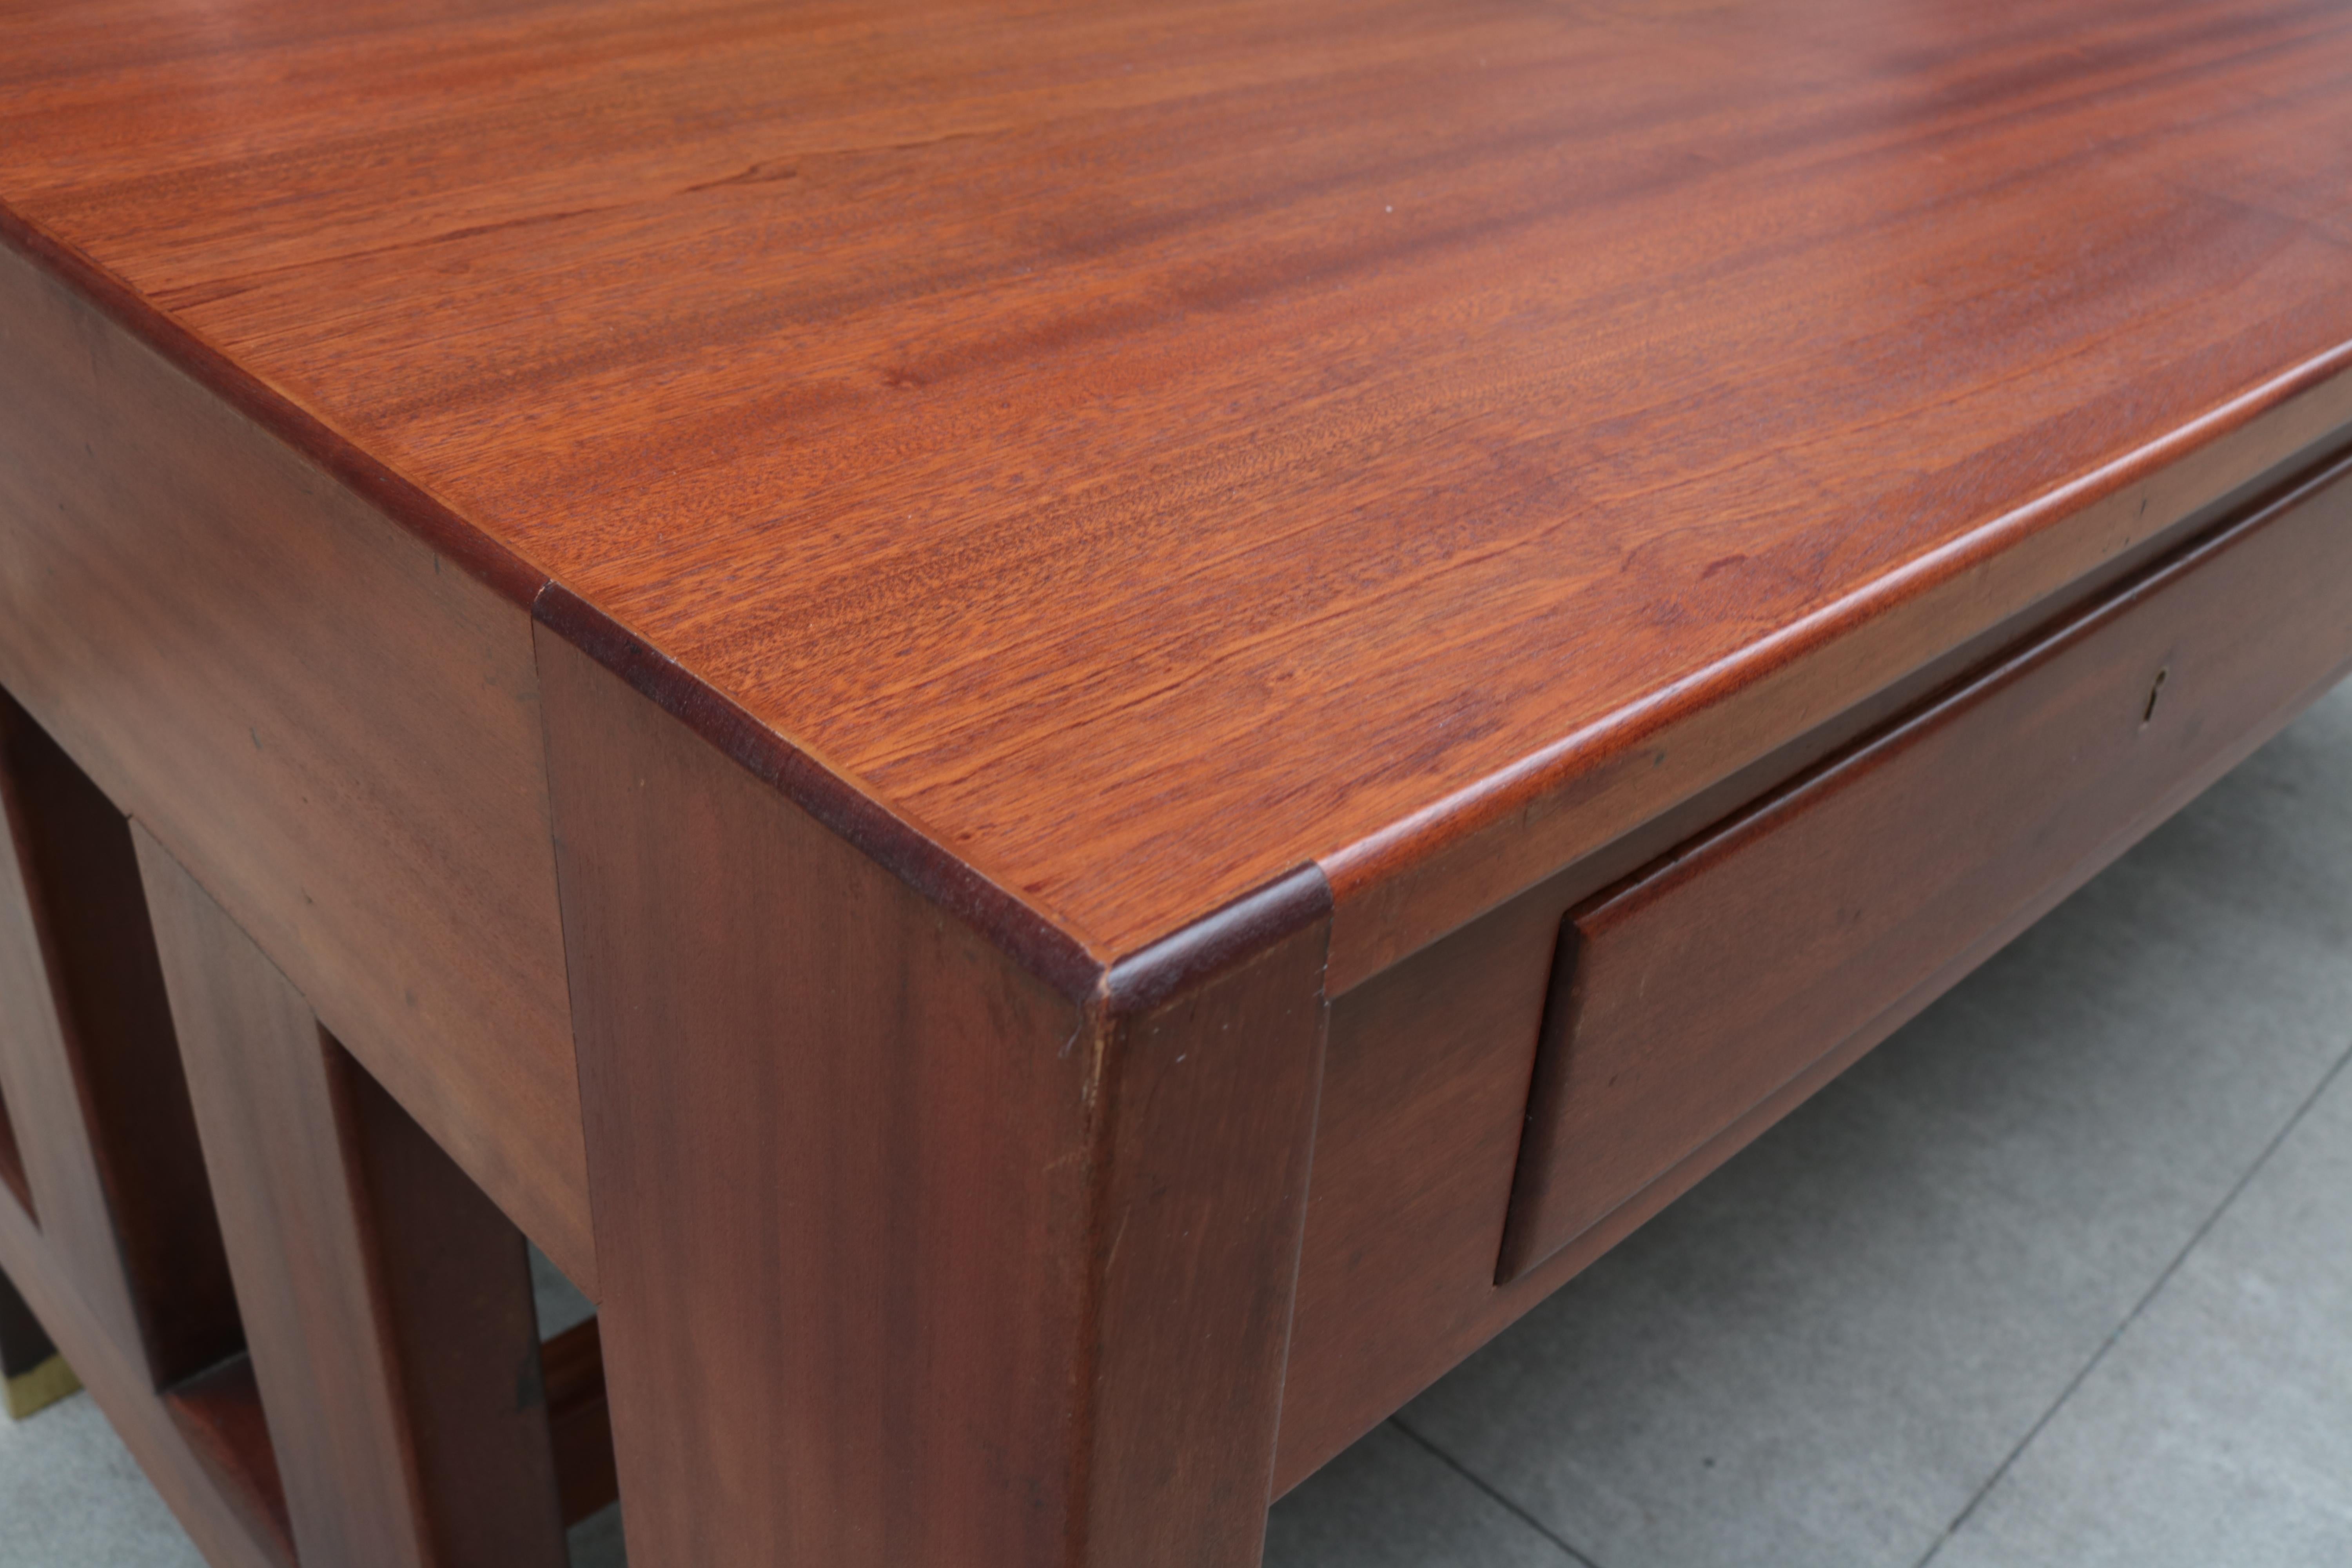 A large Gio Ponti designed three-drawer desk.
Mahogany with patinayed brass sabots.
The desk originally came from the
Banca Nazionale del Lavoro in Bergamo.
Comes with letter of authenticity from the Gio Ponti Archives.
 